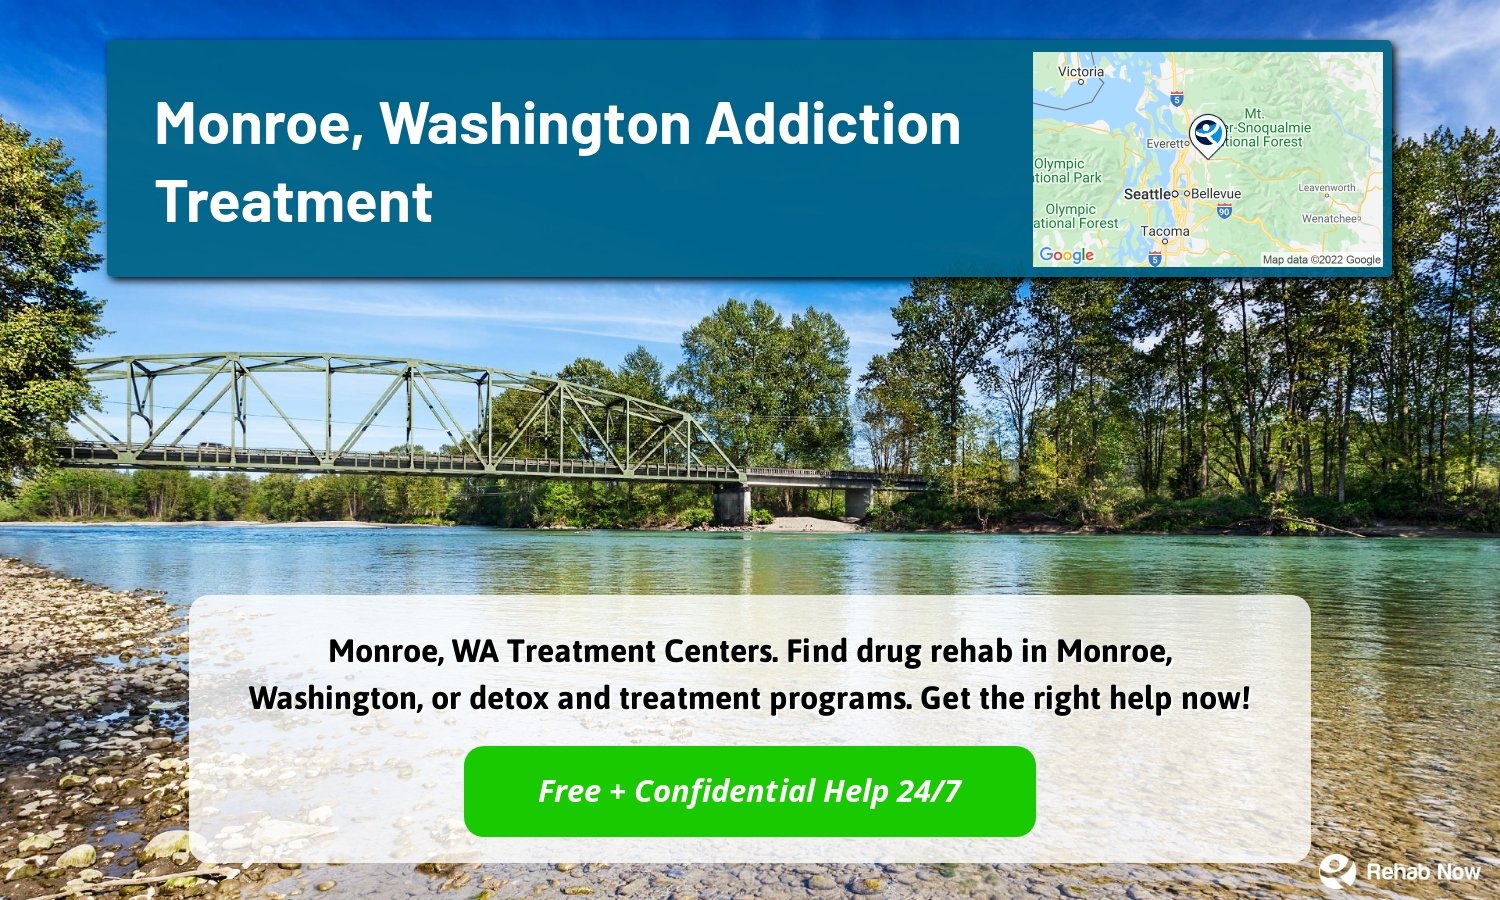 Monroe, WA Treatment Centers. Find drug rehab in Monroe, Washington, or detox and treatment programs. Get the right help now!